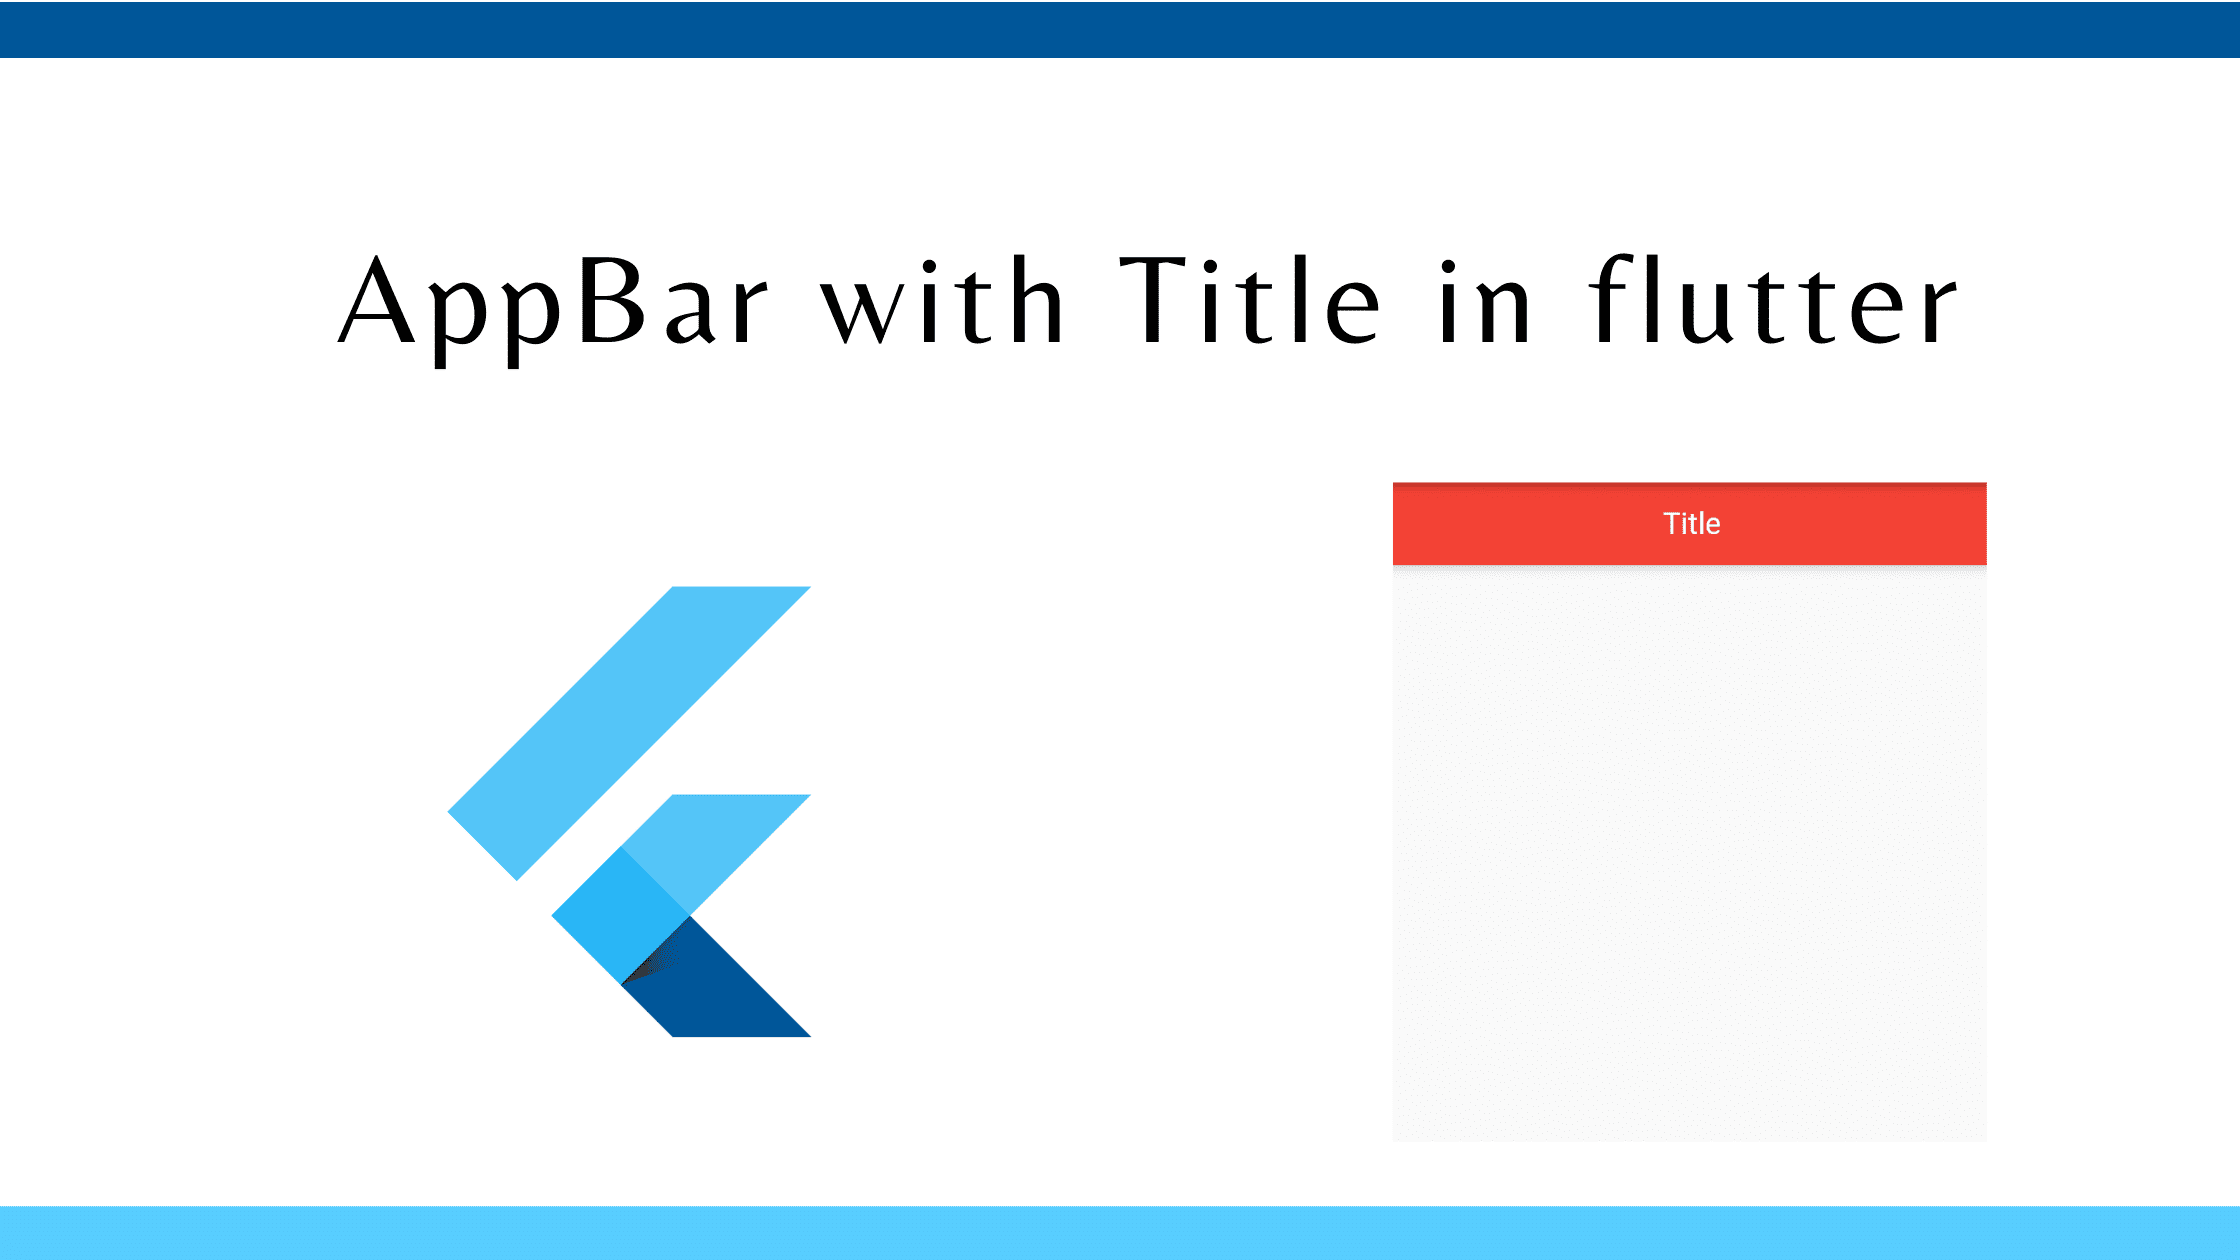 AppBar with Title in flutter